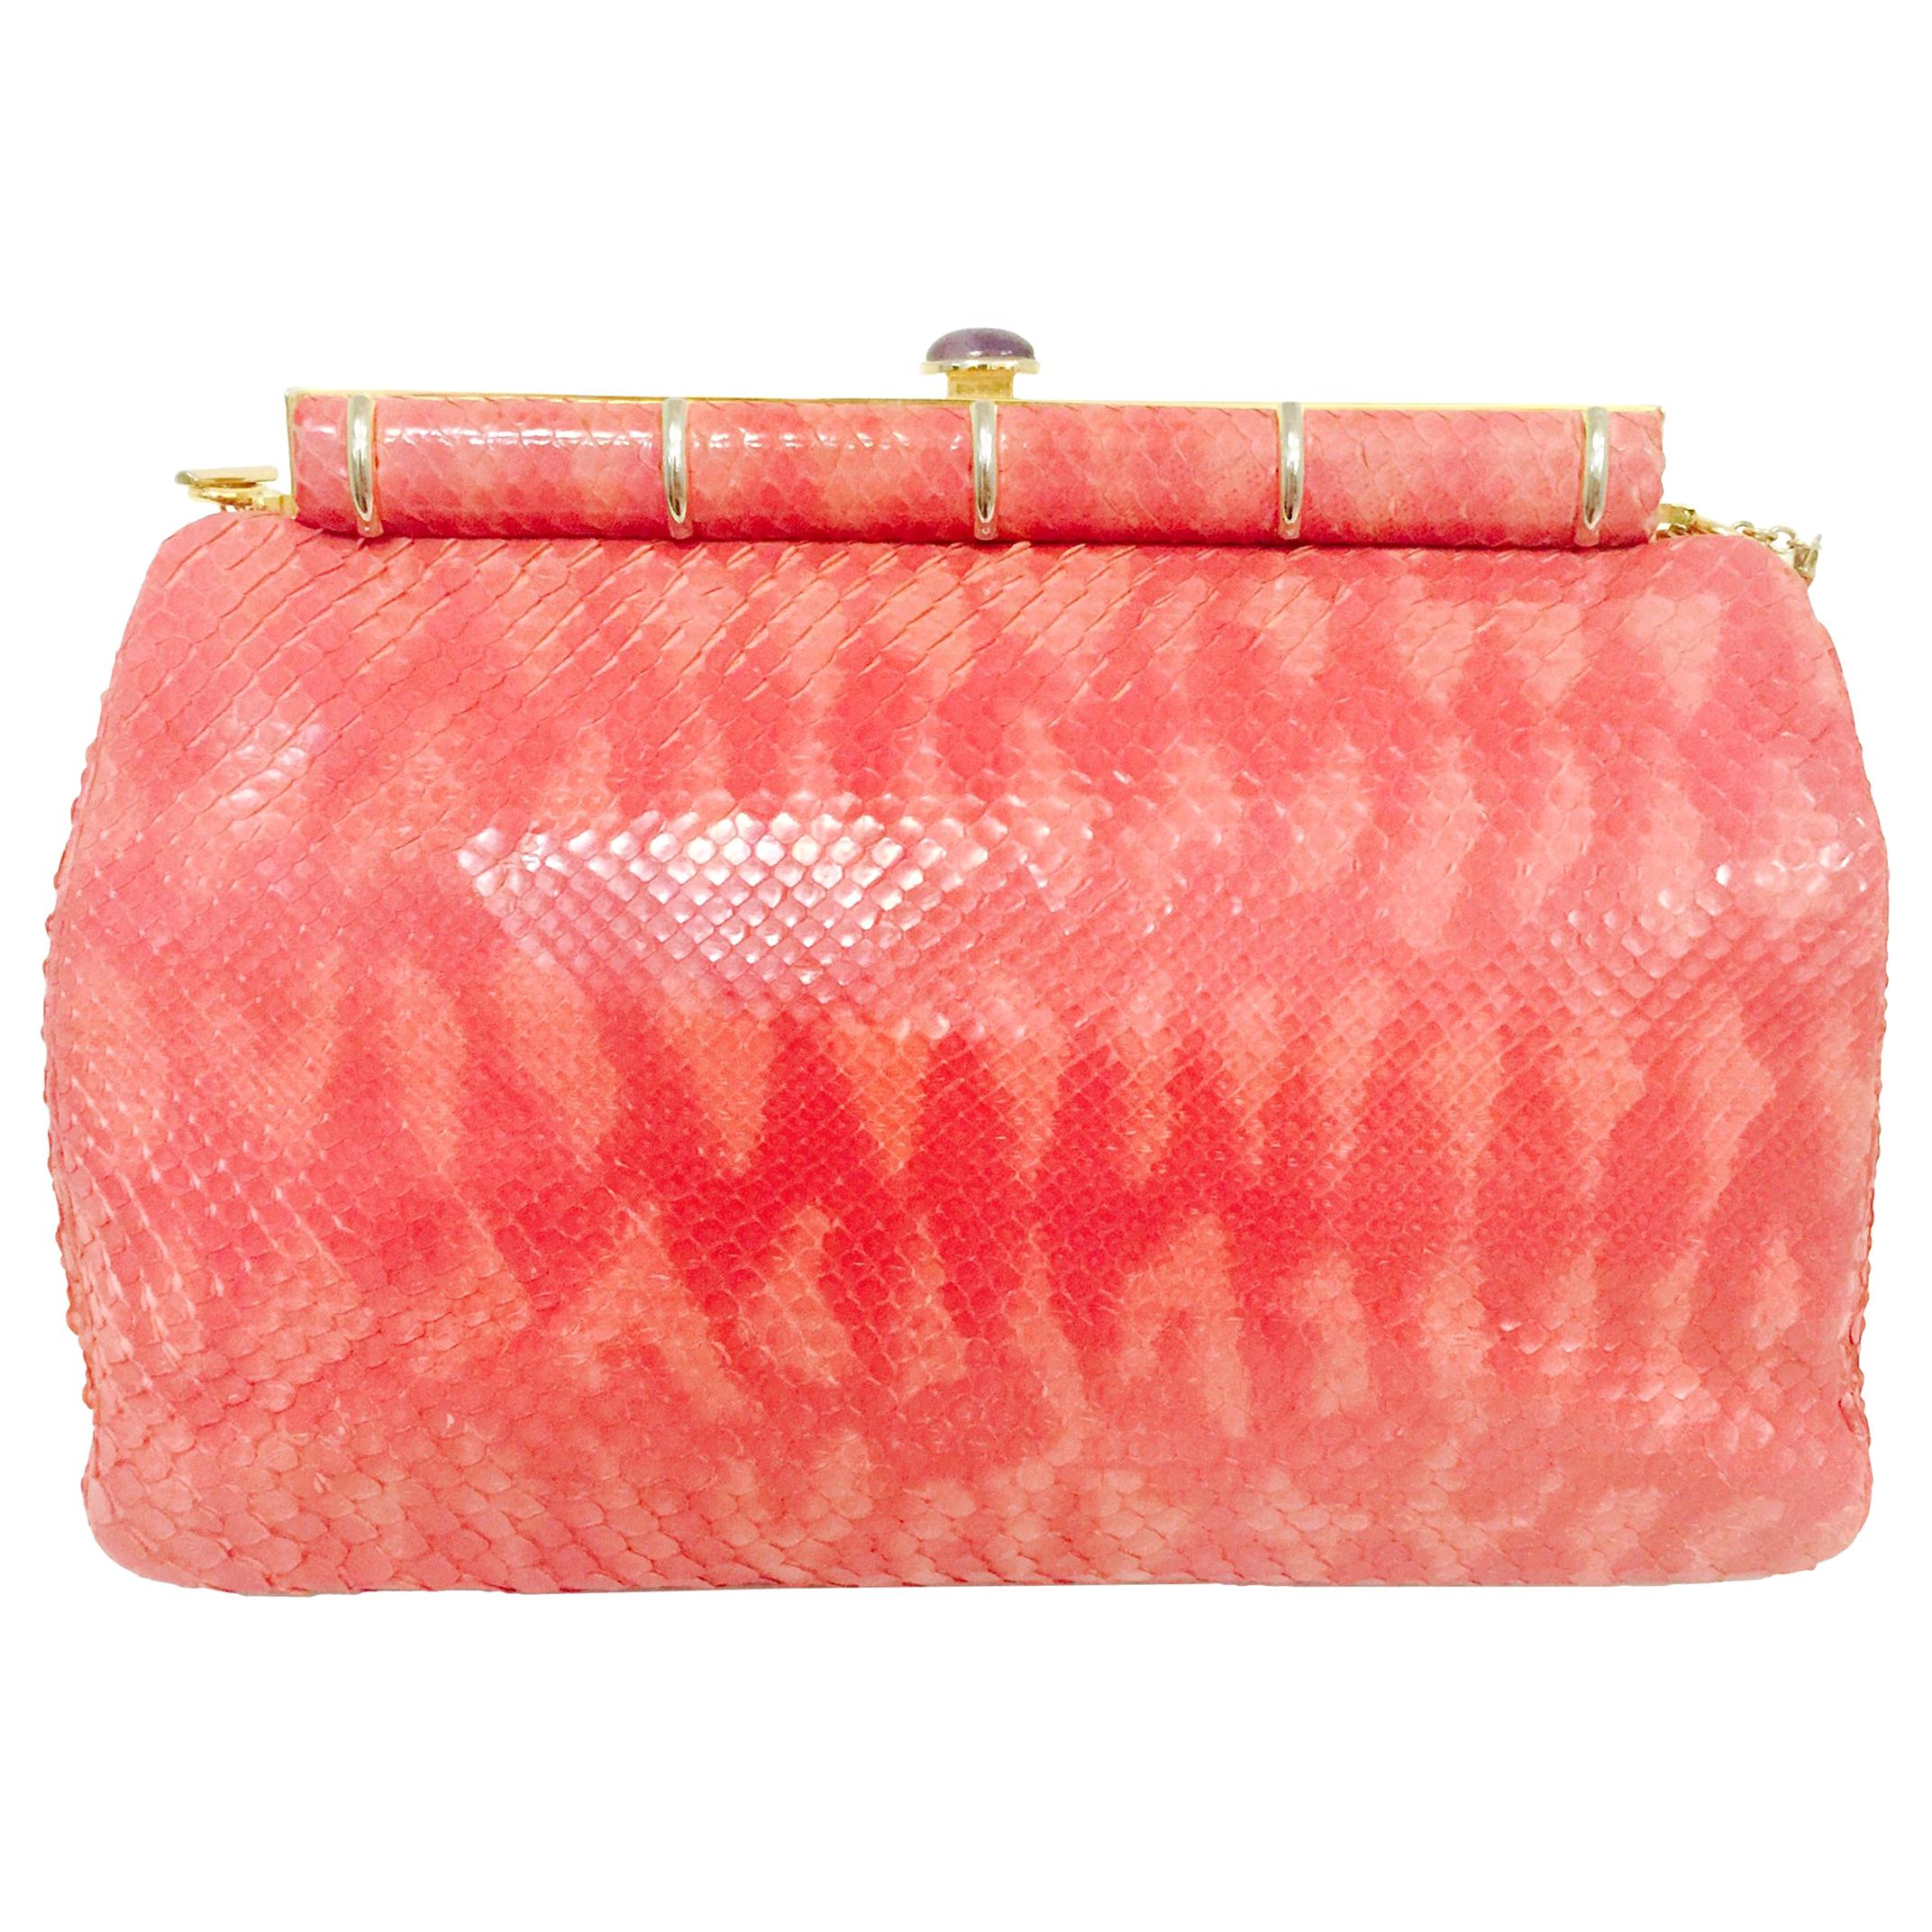 Judith Leiber Pink Python Shoulder Bag With Jeweled Clasp  For Sale